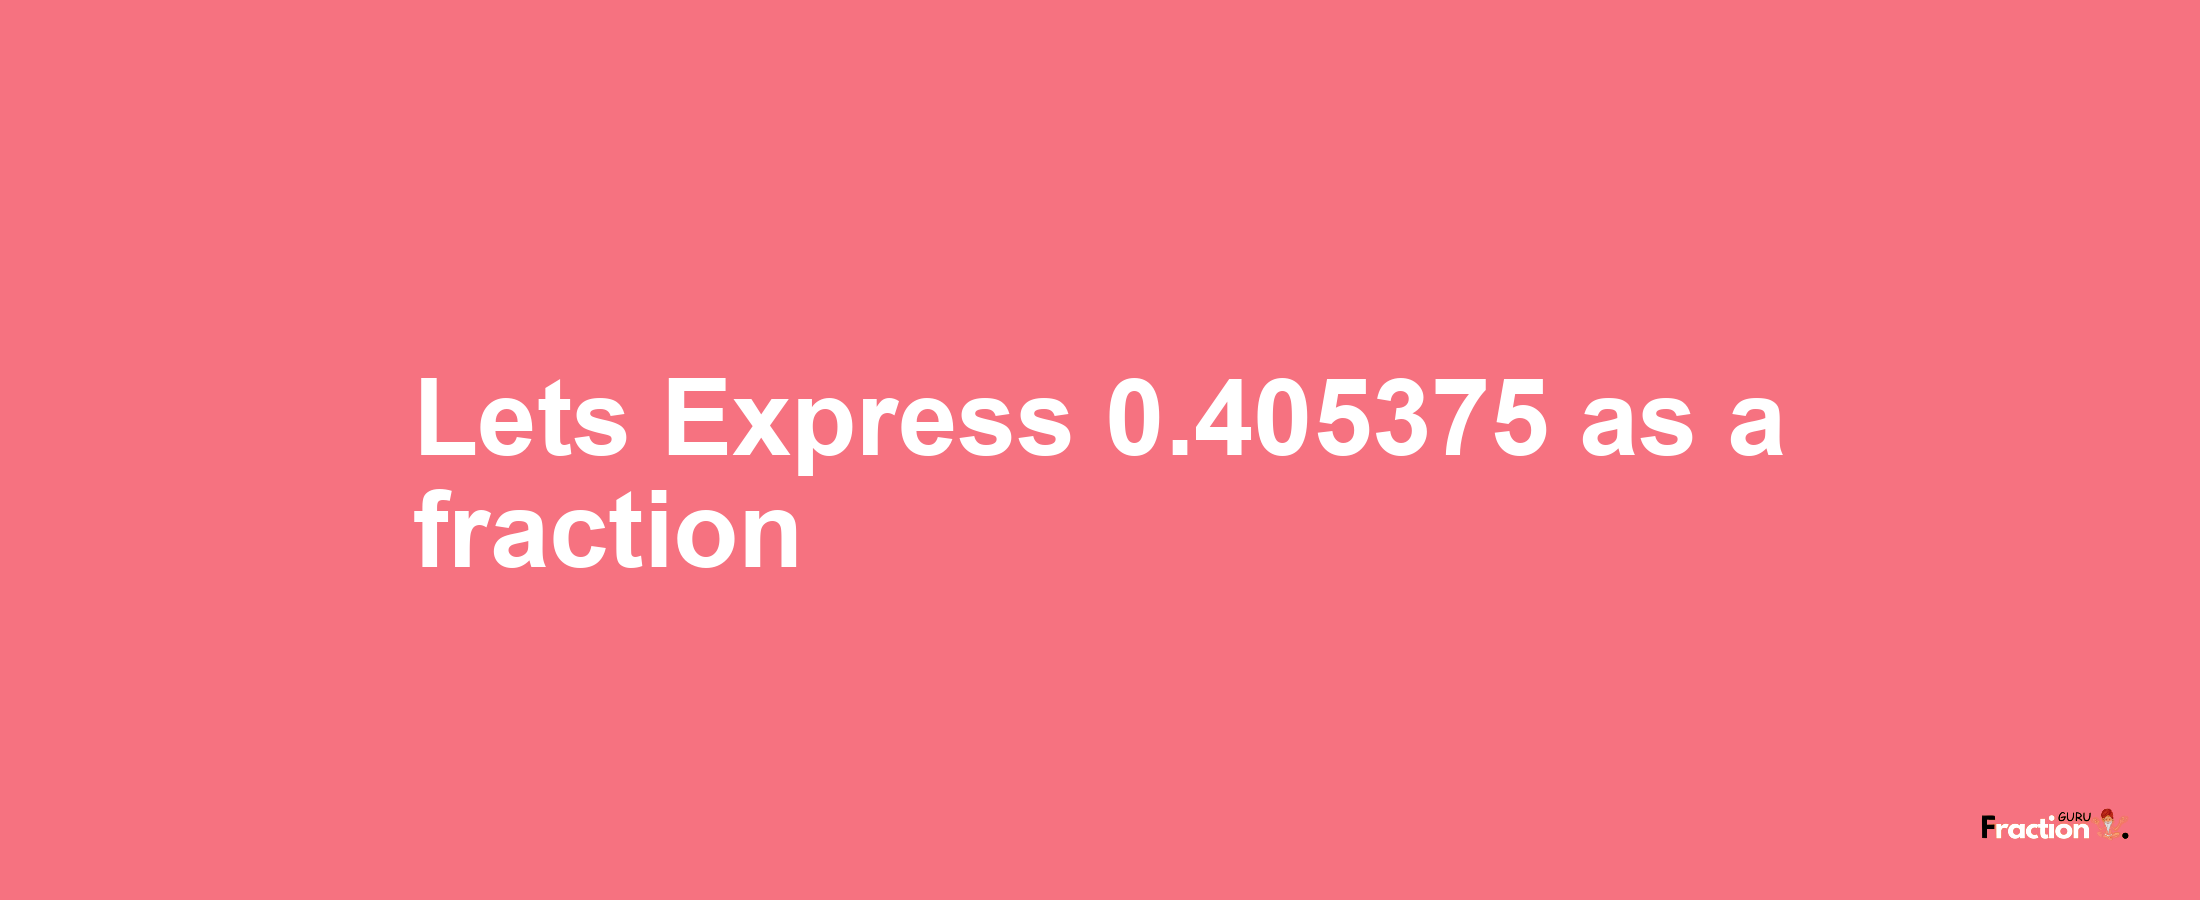 Lets Express 0.405375 as afraction